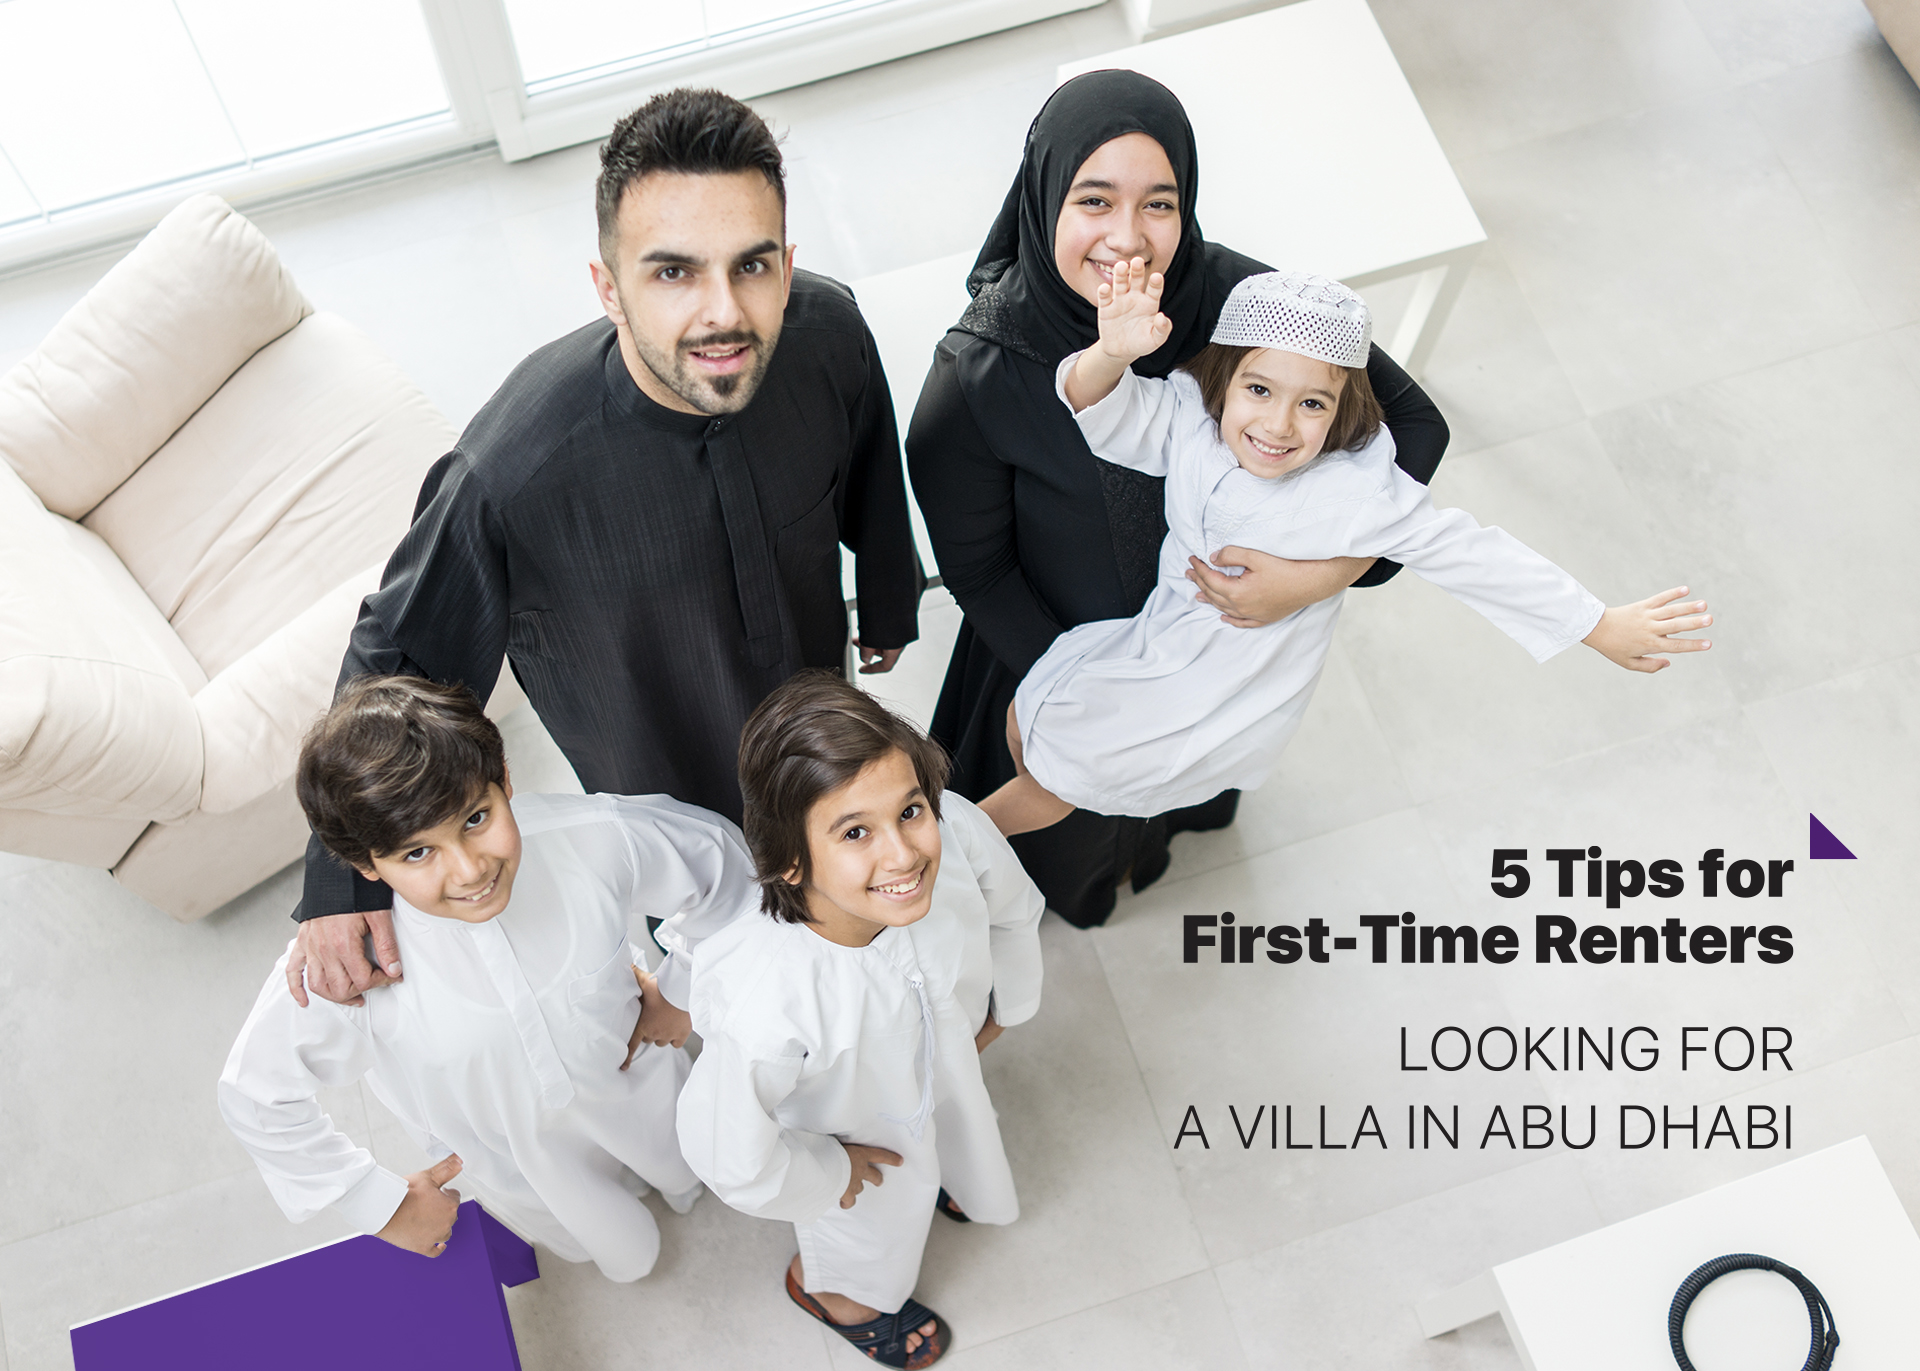 5 Tips for First-Time Renters Looking for a Villa in Abu Dhabi - a Blog Post Picture featuring emirati family.jpg